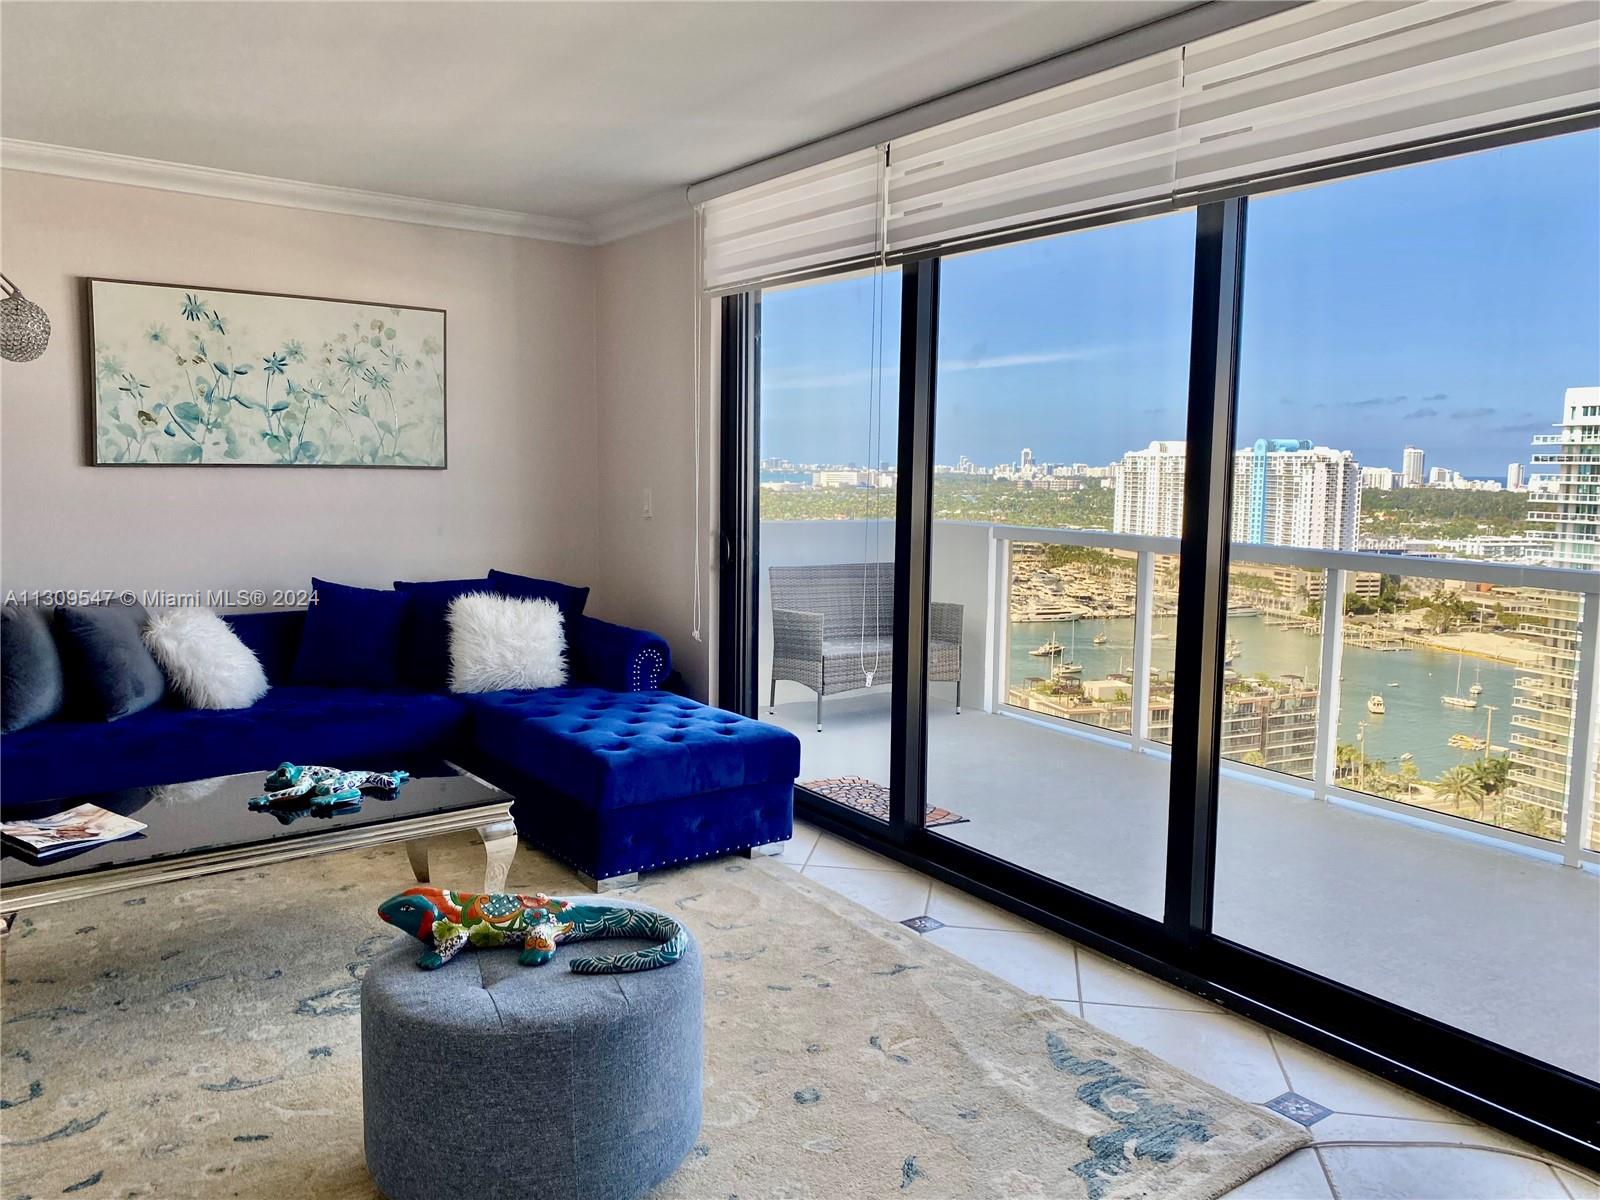 Gorgeous furnished unit with side views to the bay. Close to restaurants, shopping centers and Lincoln Road Mall.
Enjoy all the amenities you expect for today's living.(Pool, sauna, BBQ area, gym ) Security and valet. 
Impact windows has been installed recently.